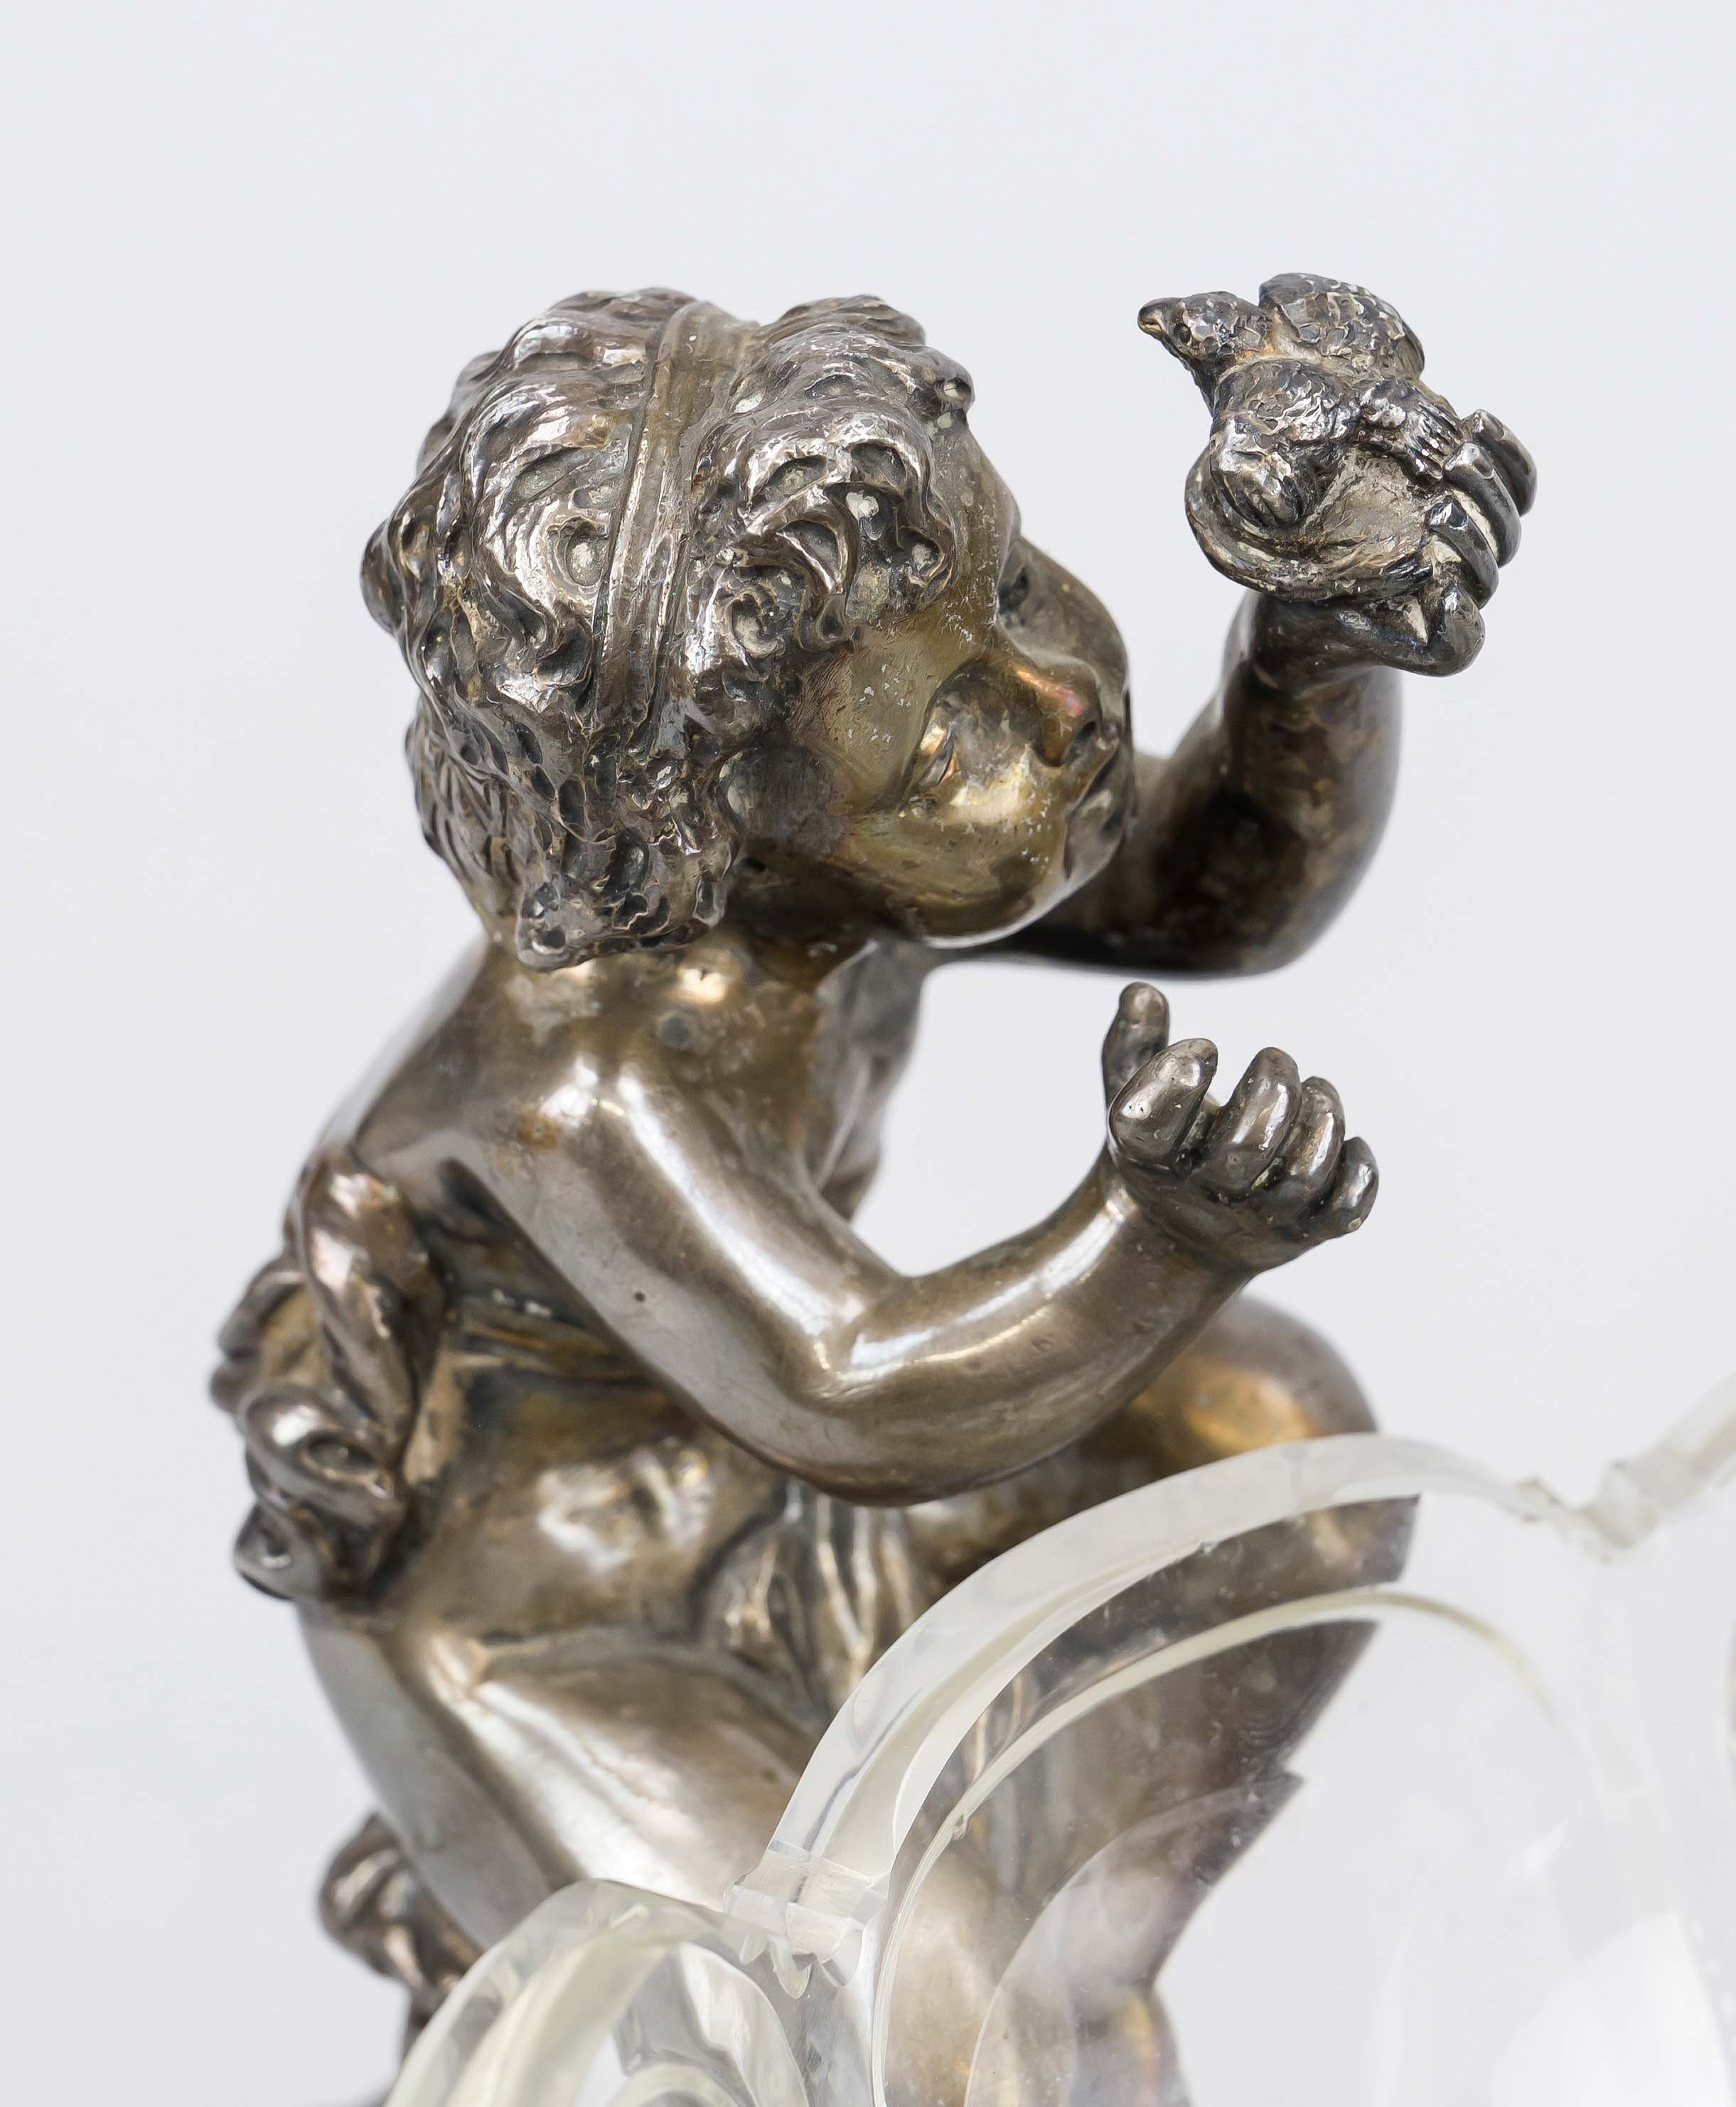 Large centerpiece with putti, 19th century, silver-plated metal with glass bowl. Fully sculpted with - Image 3 of 3